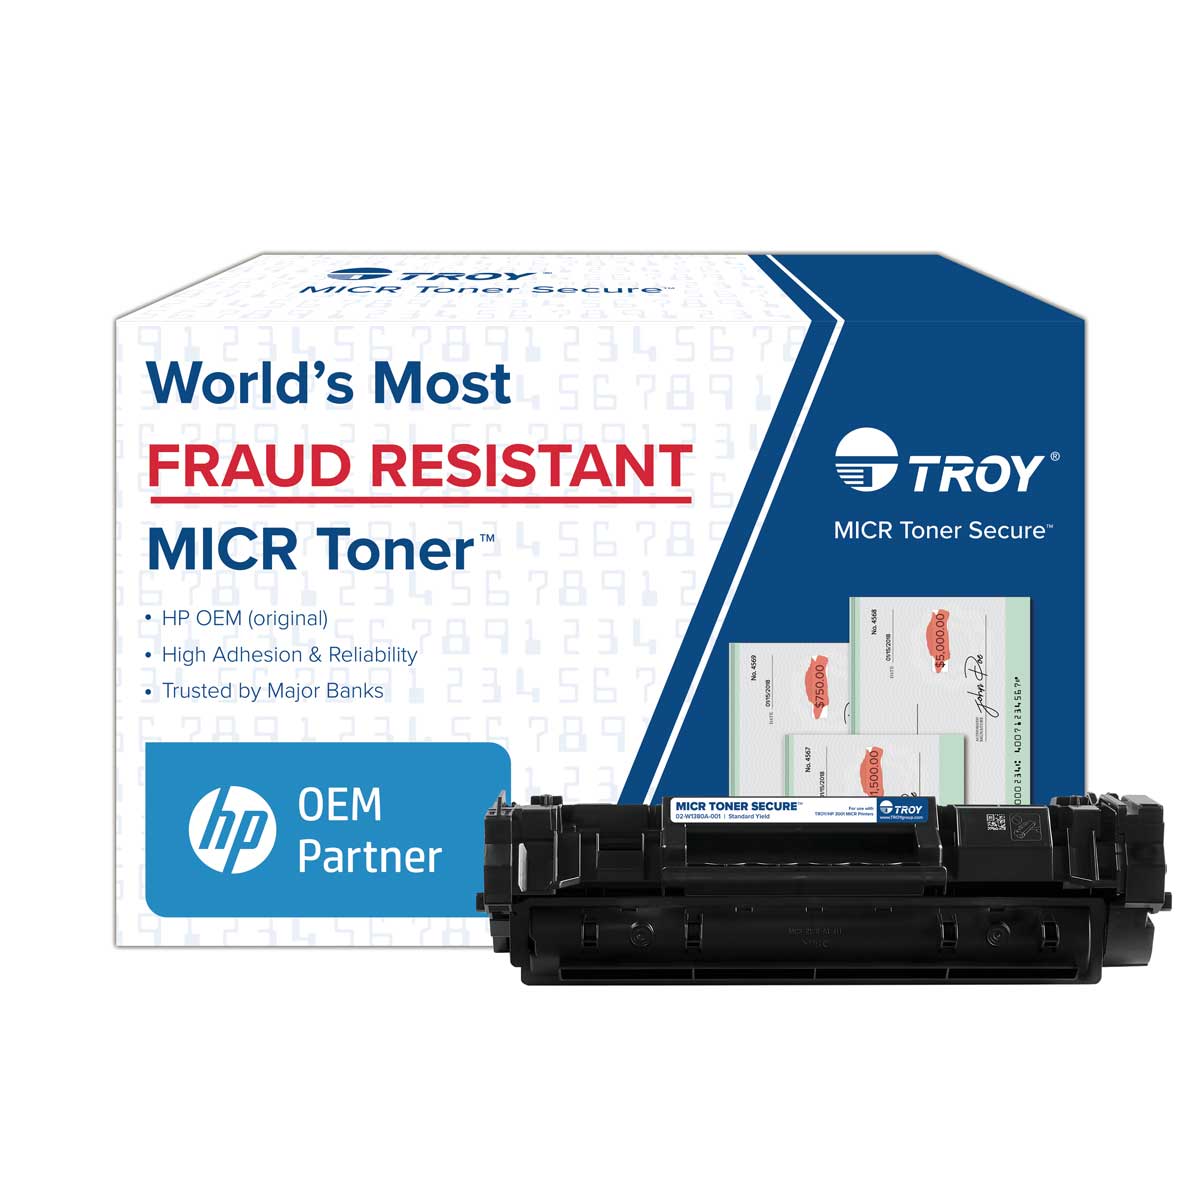 TROY 3001 MICR Toner Secure Standard Yield Cartridge (Coordinating HP Part Number: W1380A)